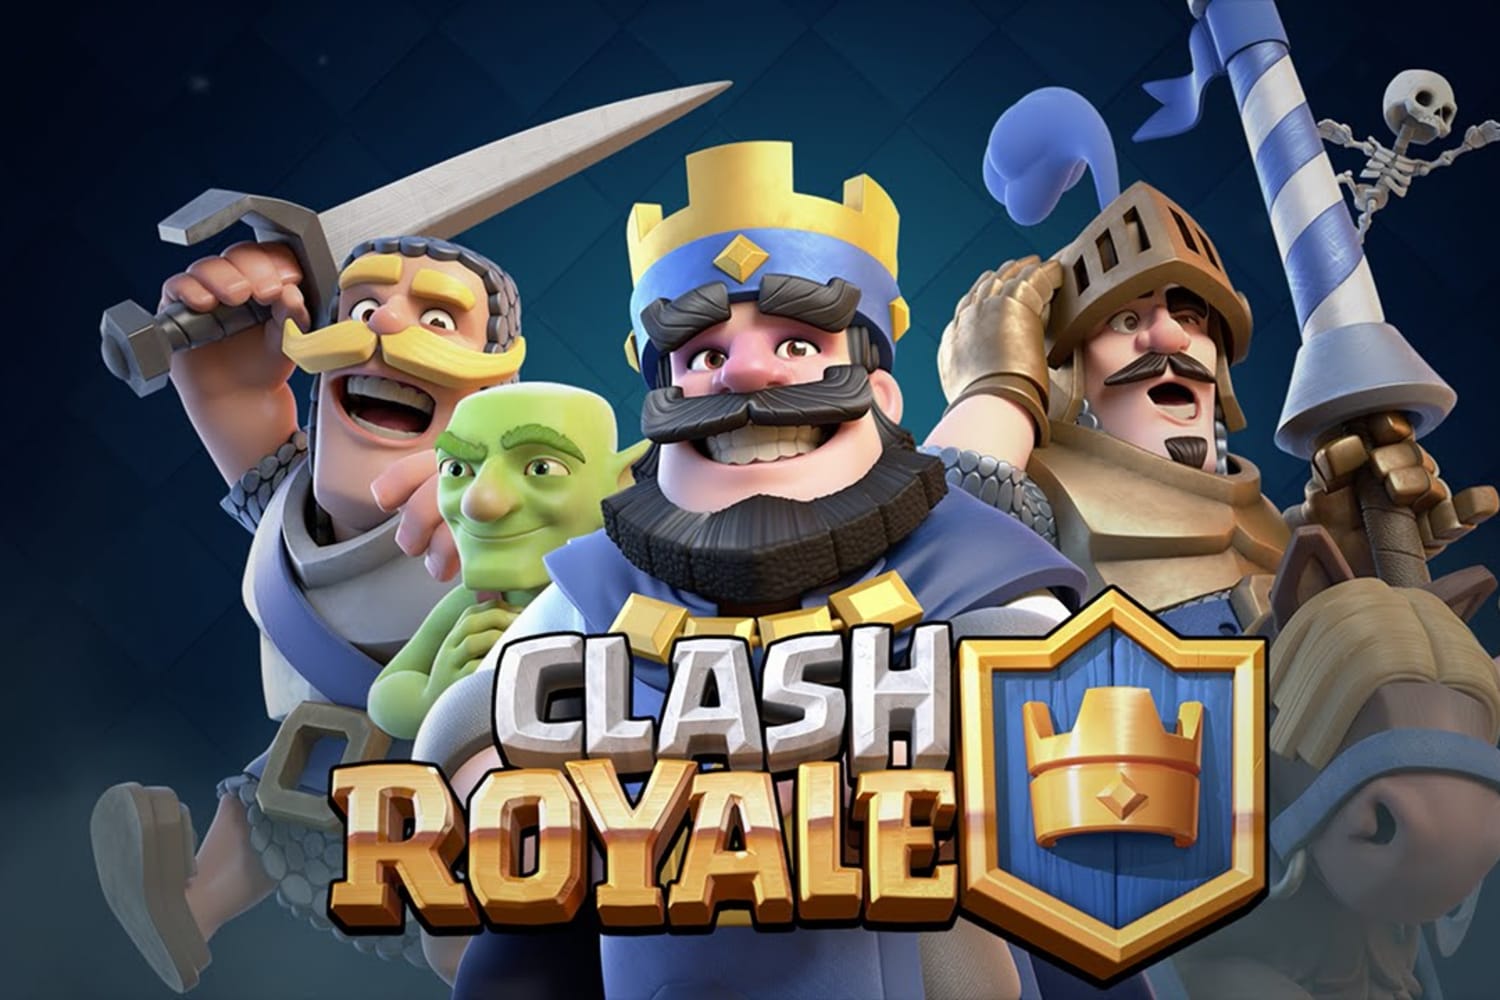 How to play Clash Royale in 2020 